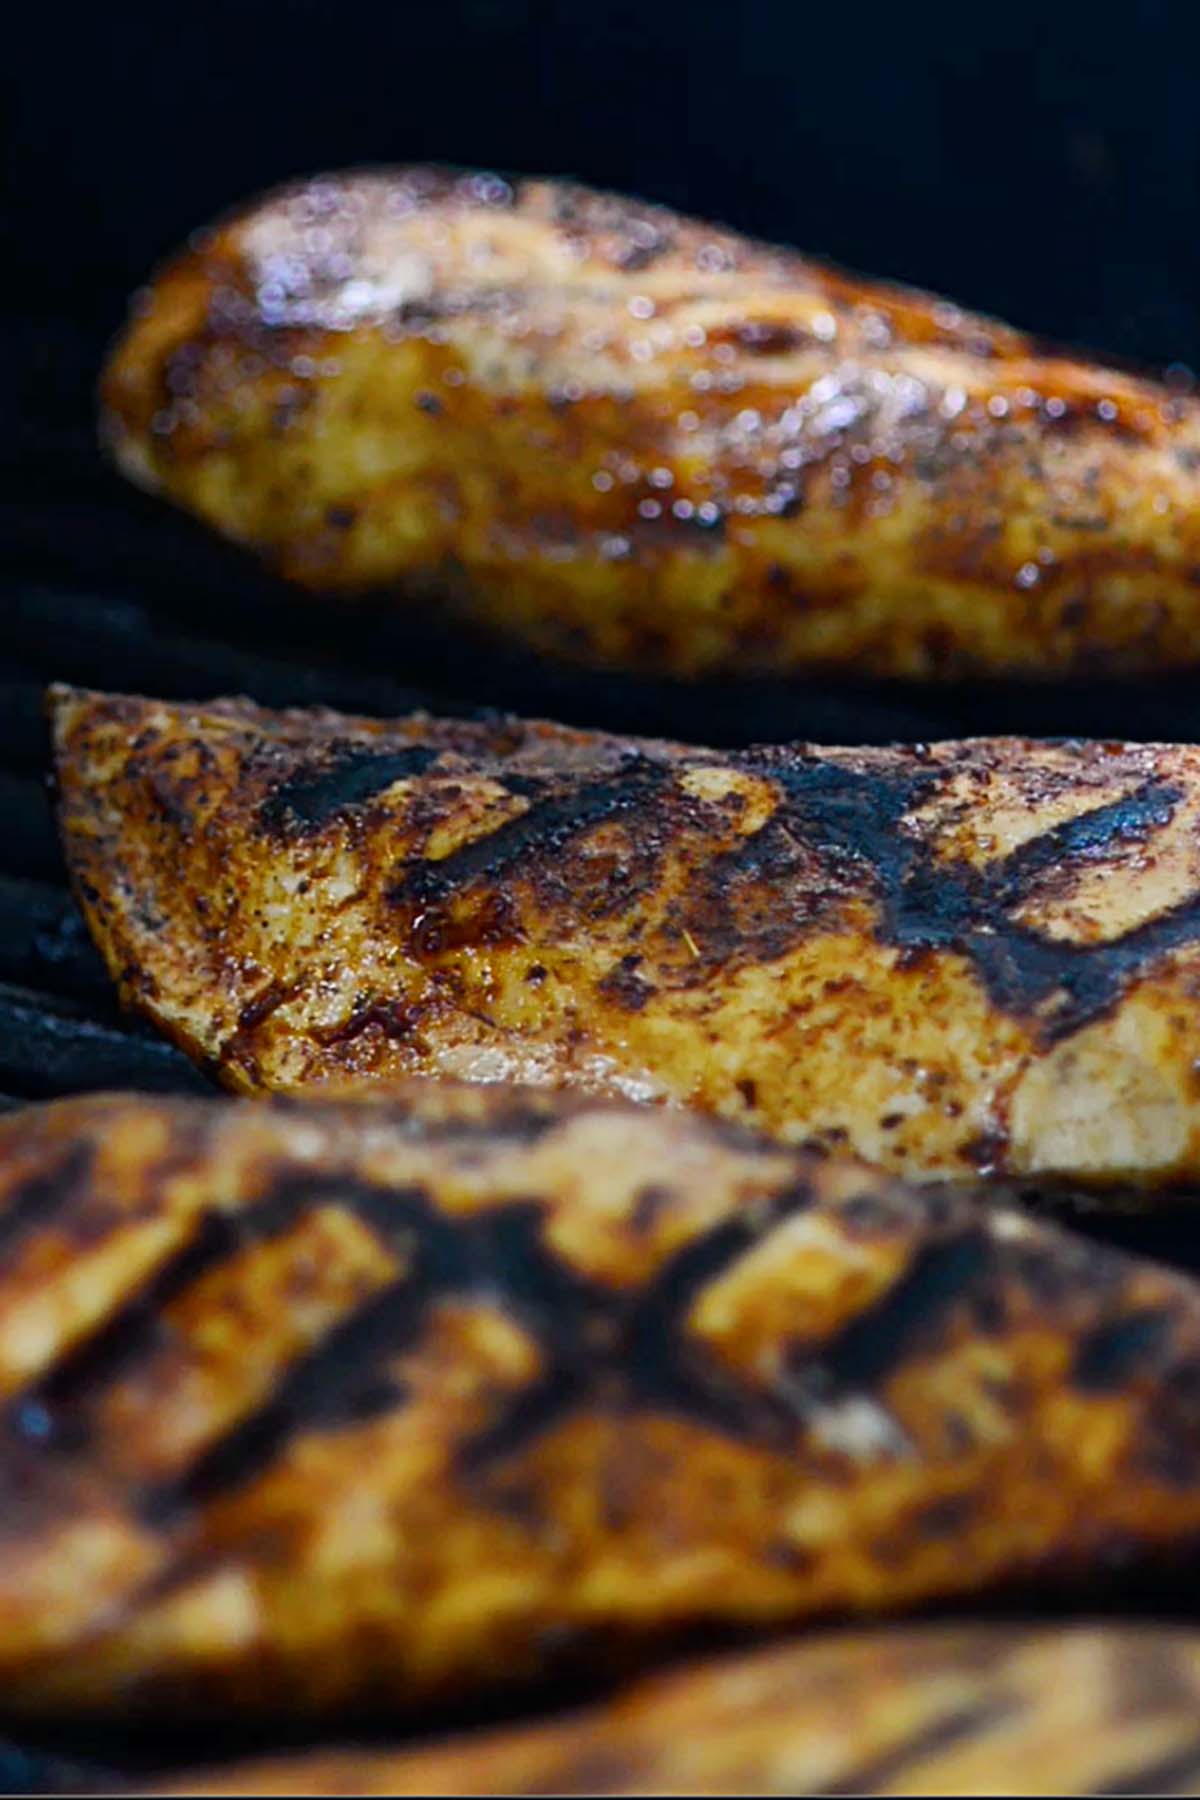 Chicken breasts on the grill with cross hatched grill marks.